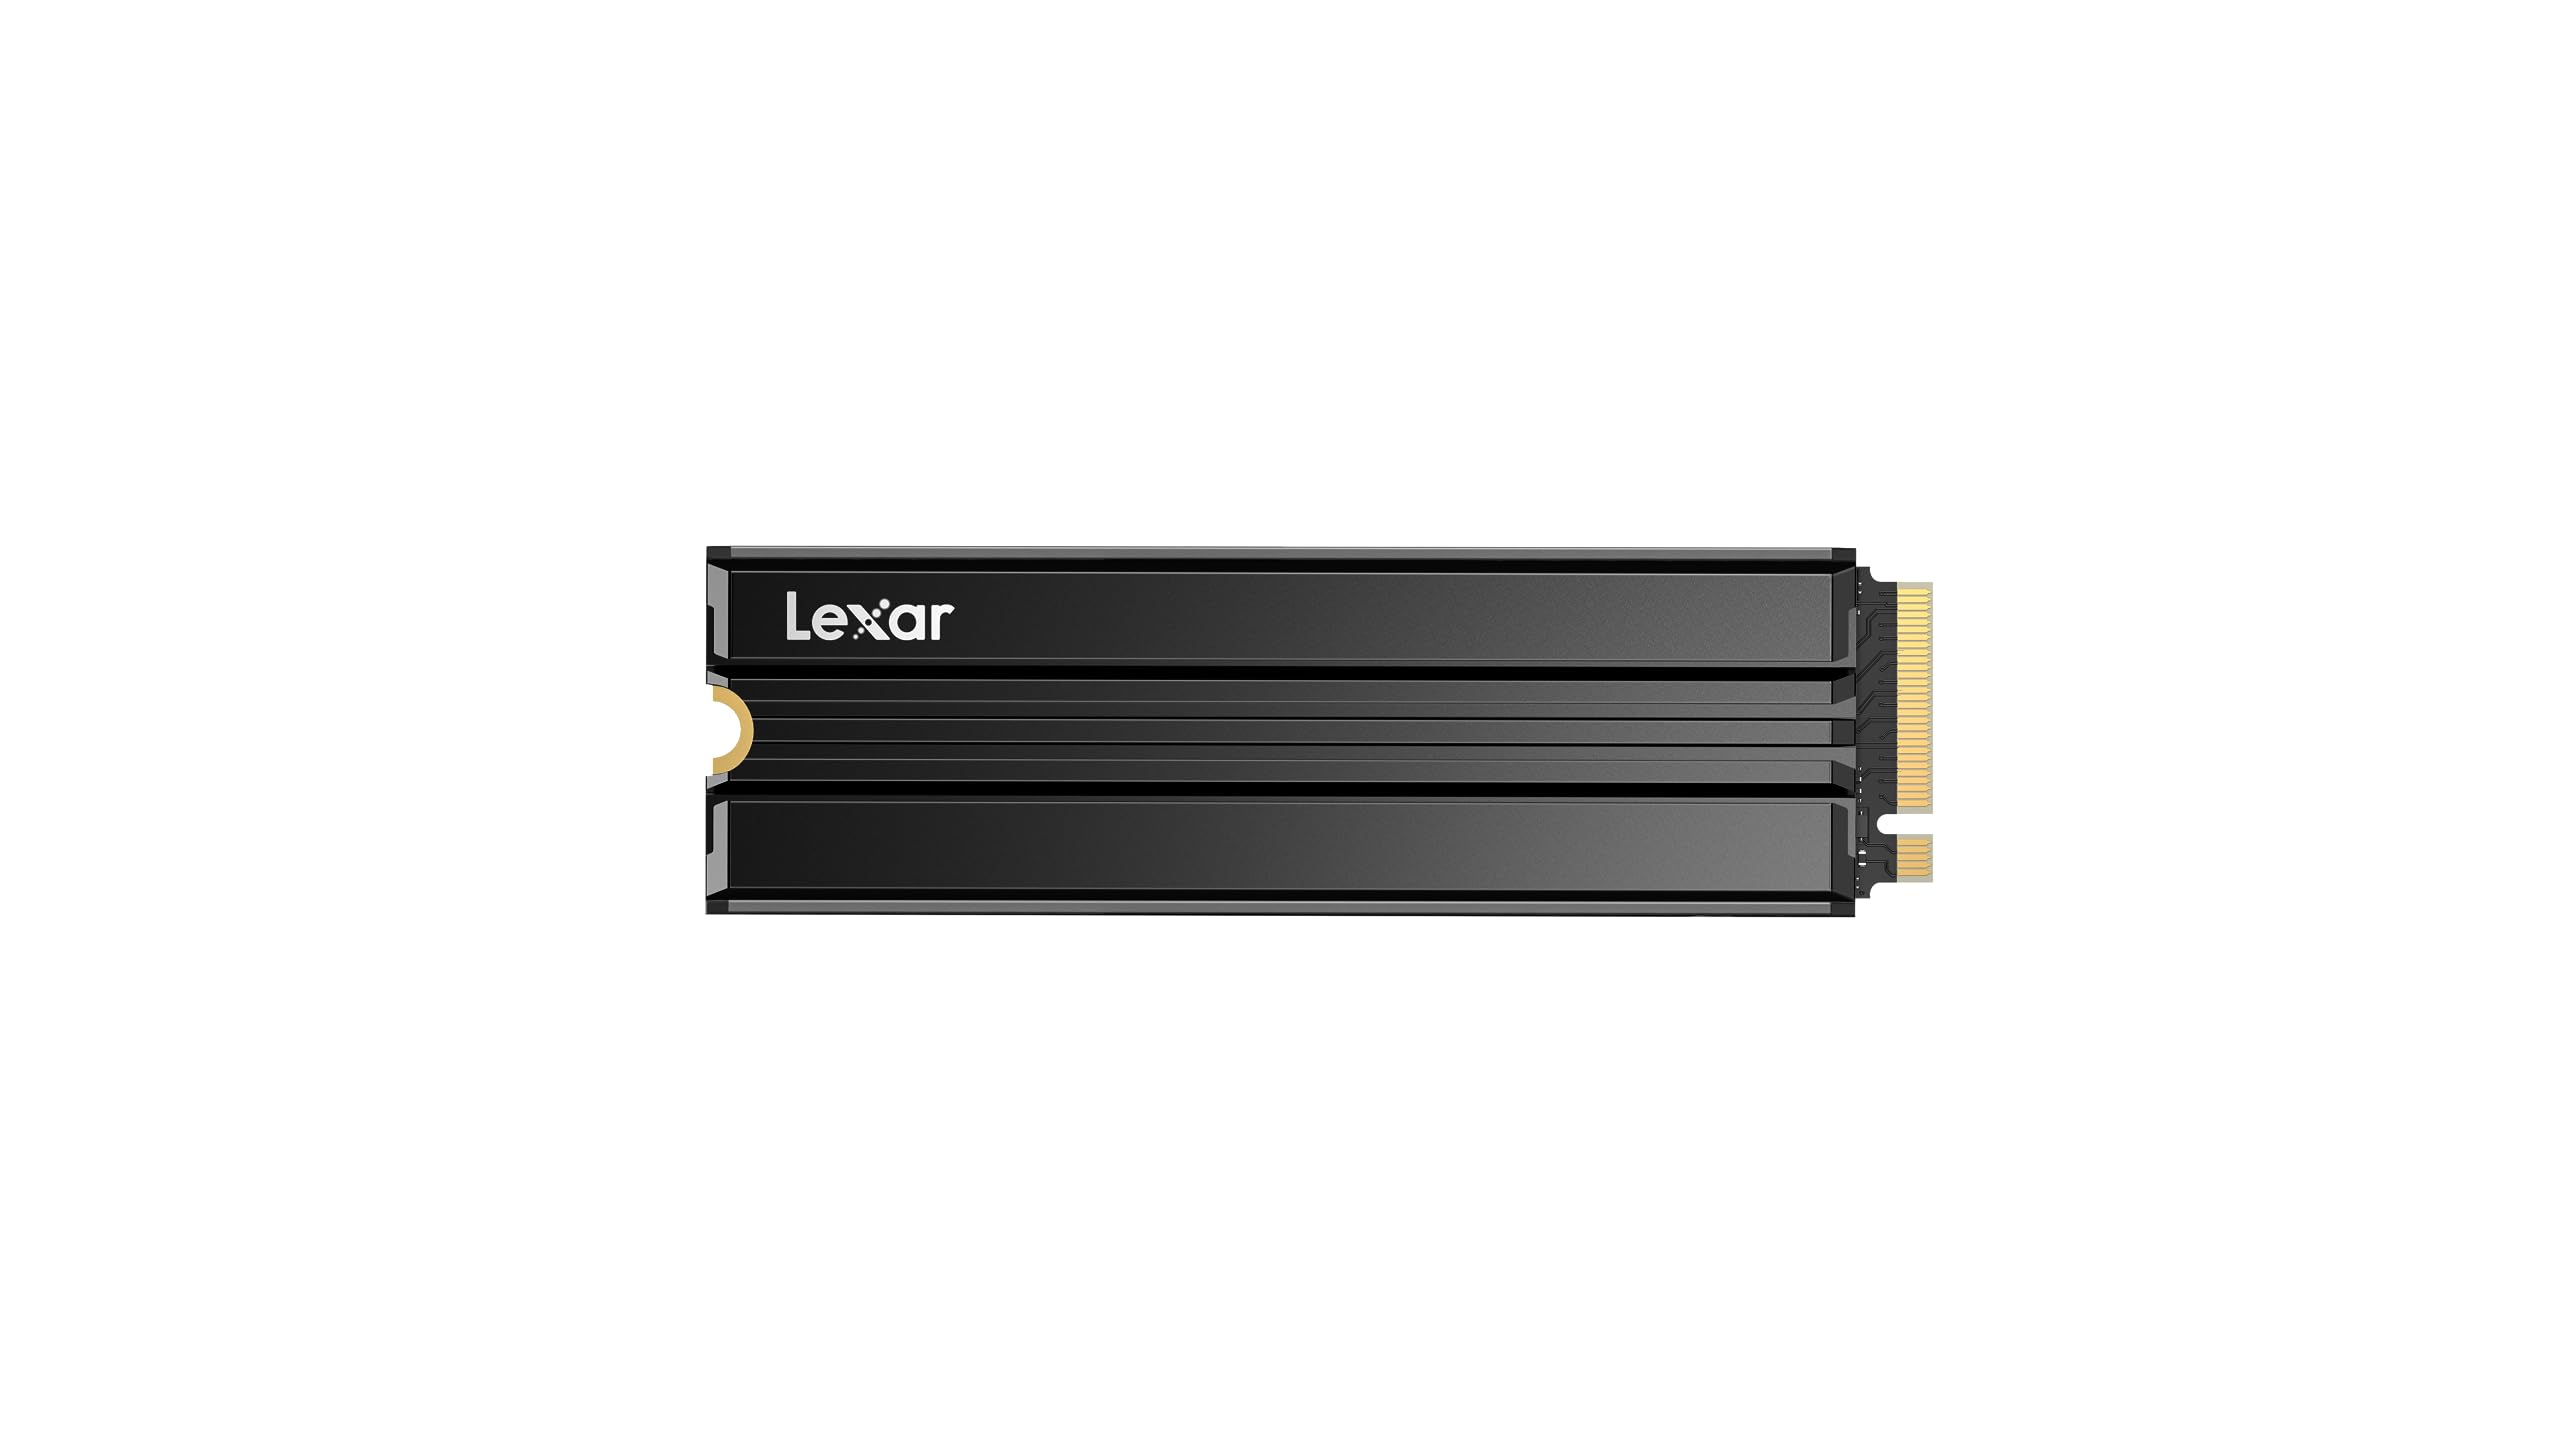 Lexar NM790 SSD with Heatsink 4TB PCIe Gen4 NVMe M.2 2280 Internal Solid State Drive, Up to 7400MB/s, Compatible with PS5, for Gamers and Creators (LNM790X004T-RN9NU)